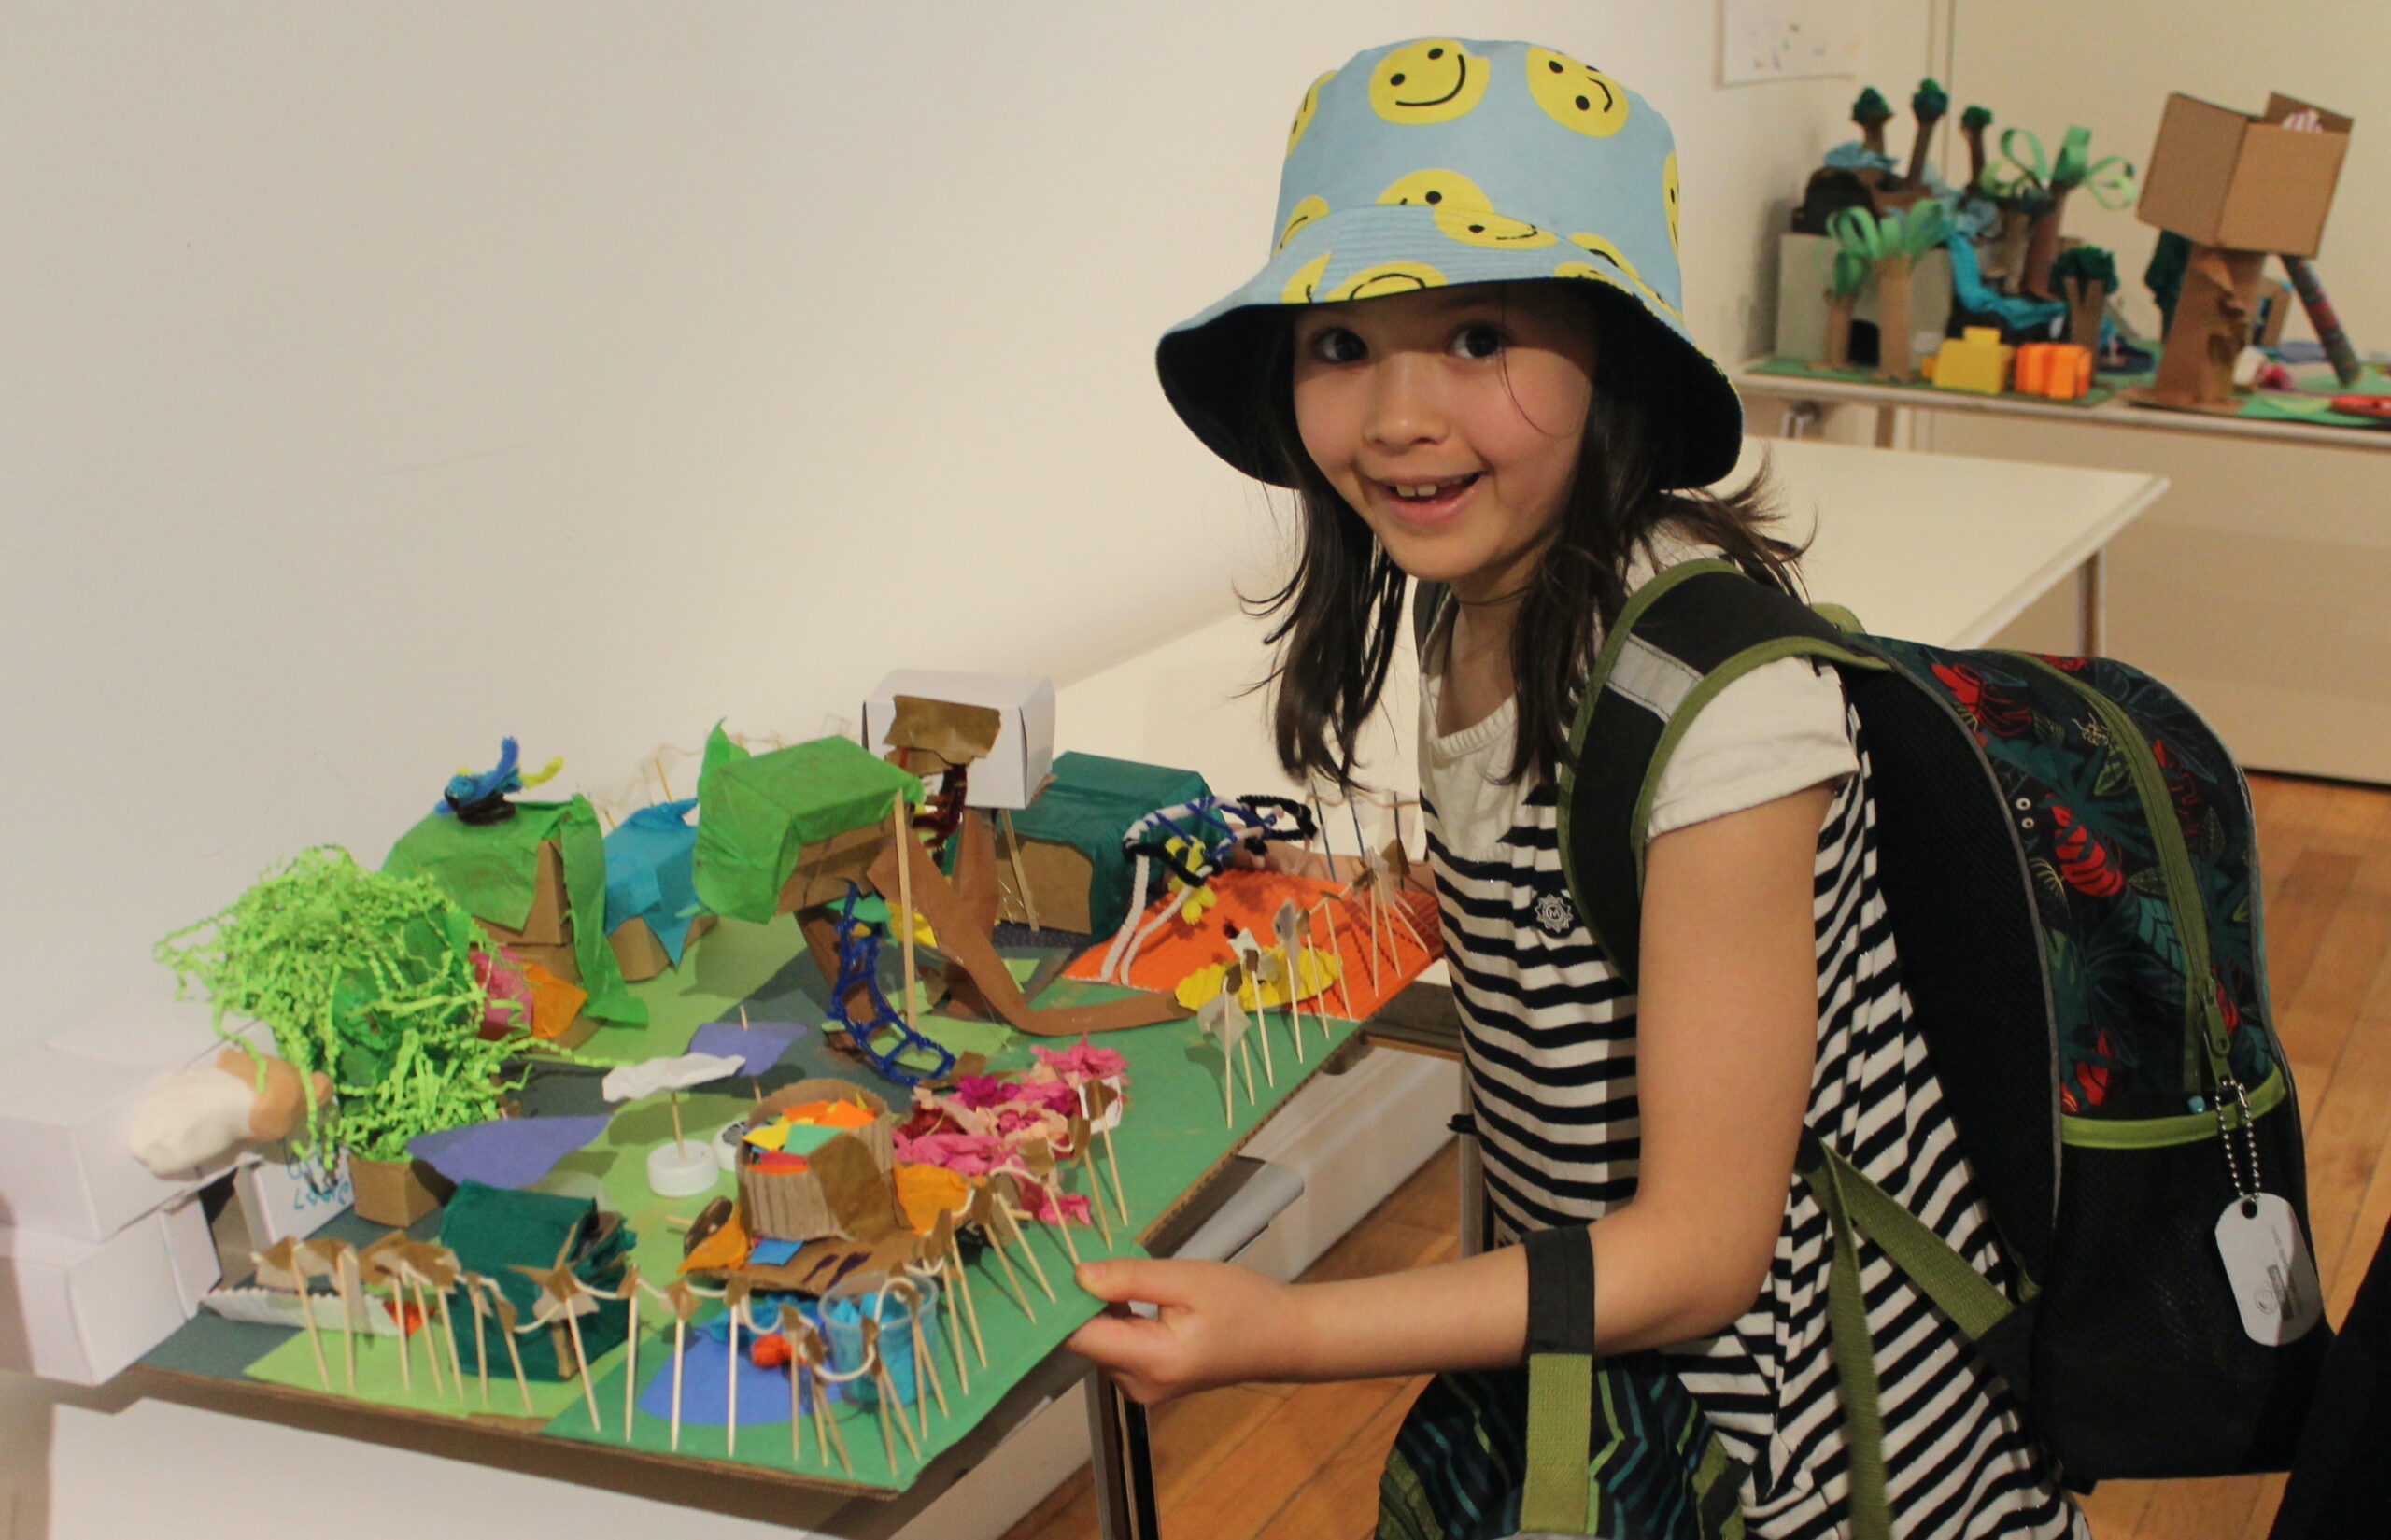 Elementary school student posing with their model of a park and playground